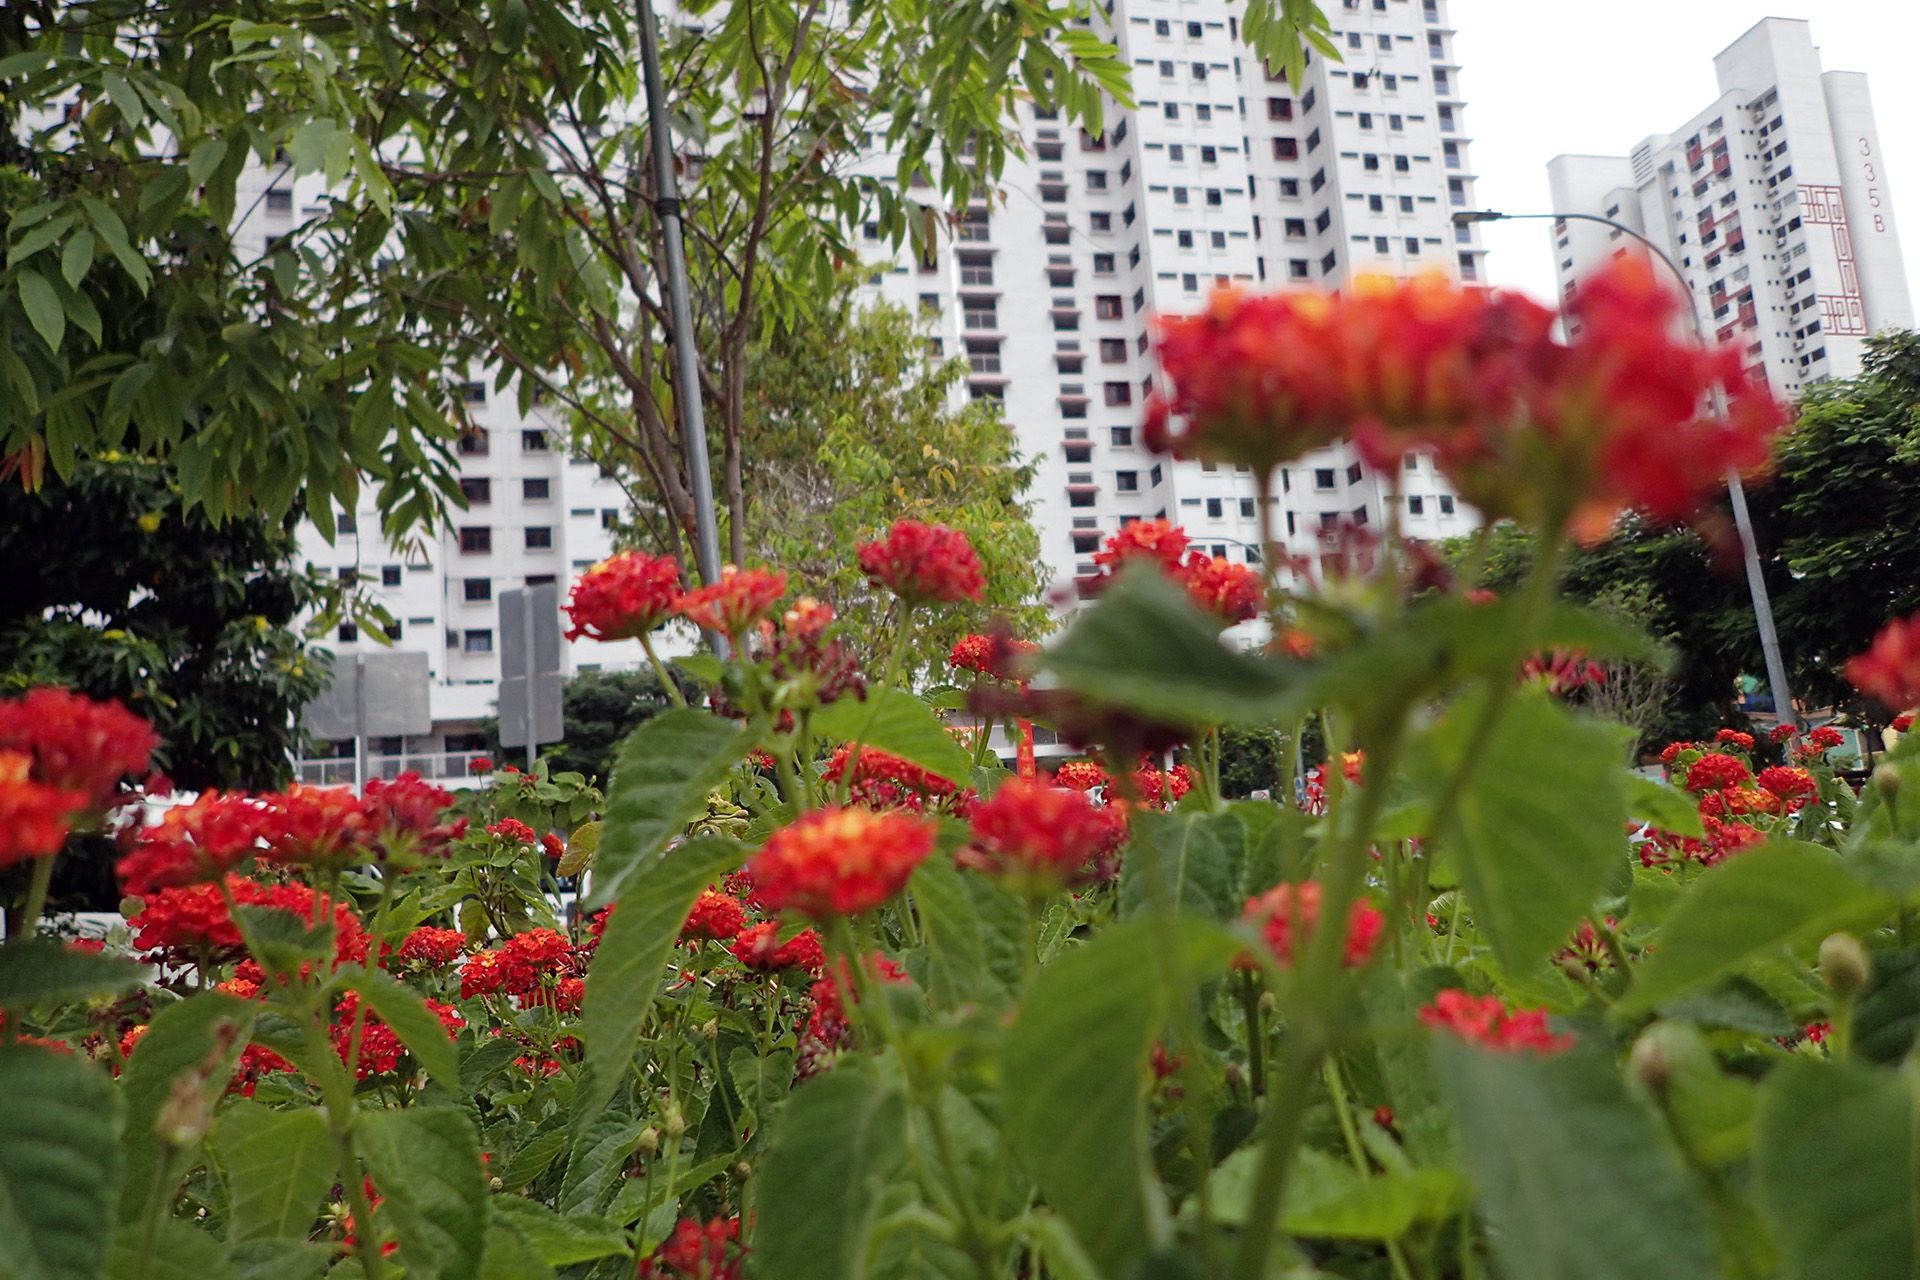 Lantana, seen along South Bridge Road on March 1, is planted for its abundance of brightly coloured flowers. ST PHOTO: NEO XIAOBIN